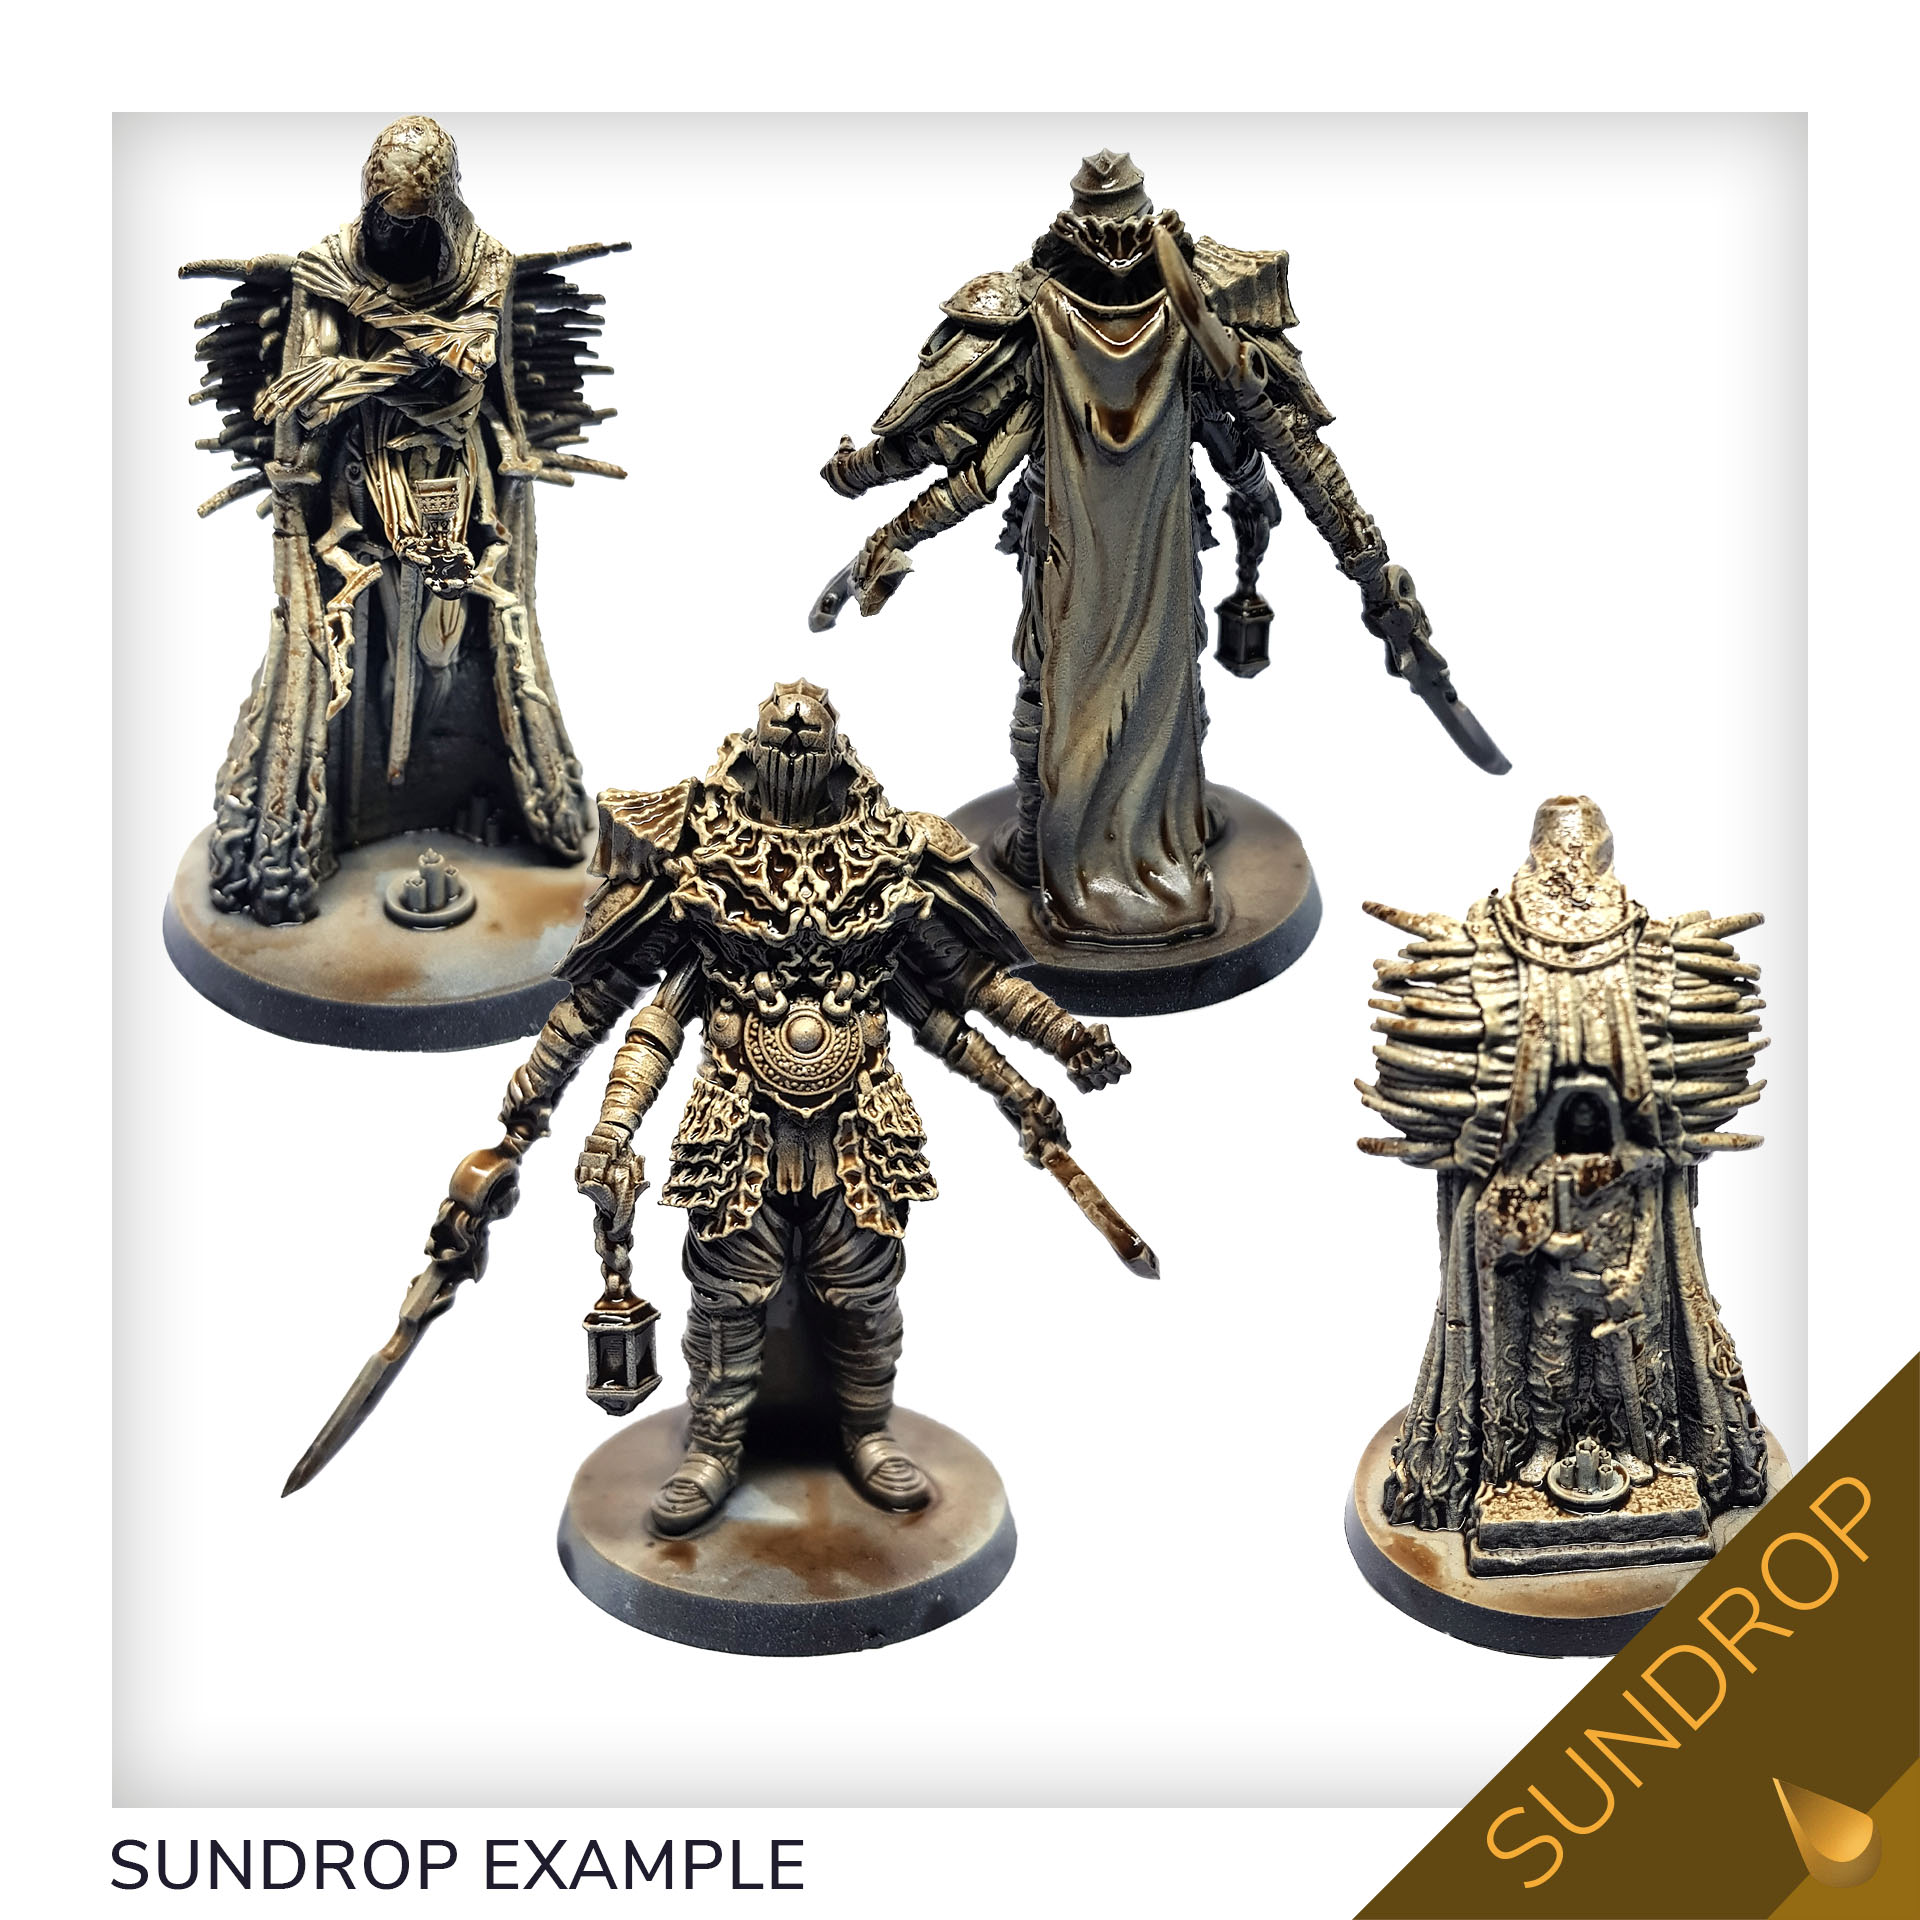 Details about   4x Tainted Grail Fall Of Avalon Ailei Maggort Beor Heroes DND Game Sundrop Minis 